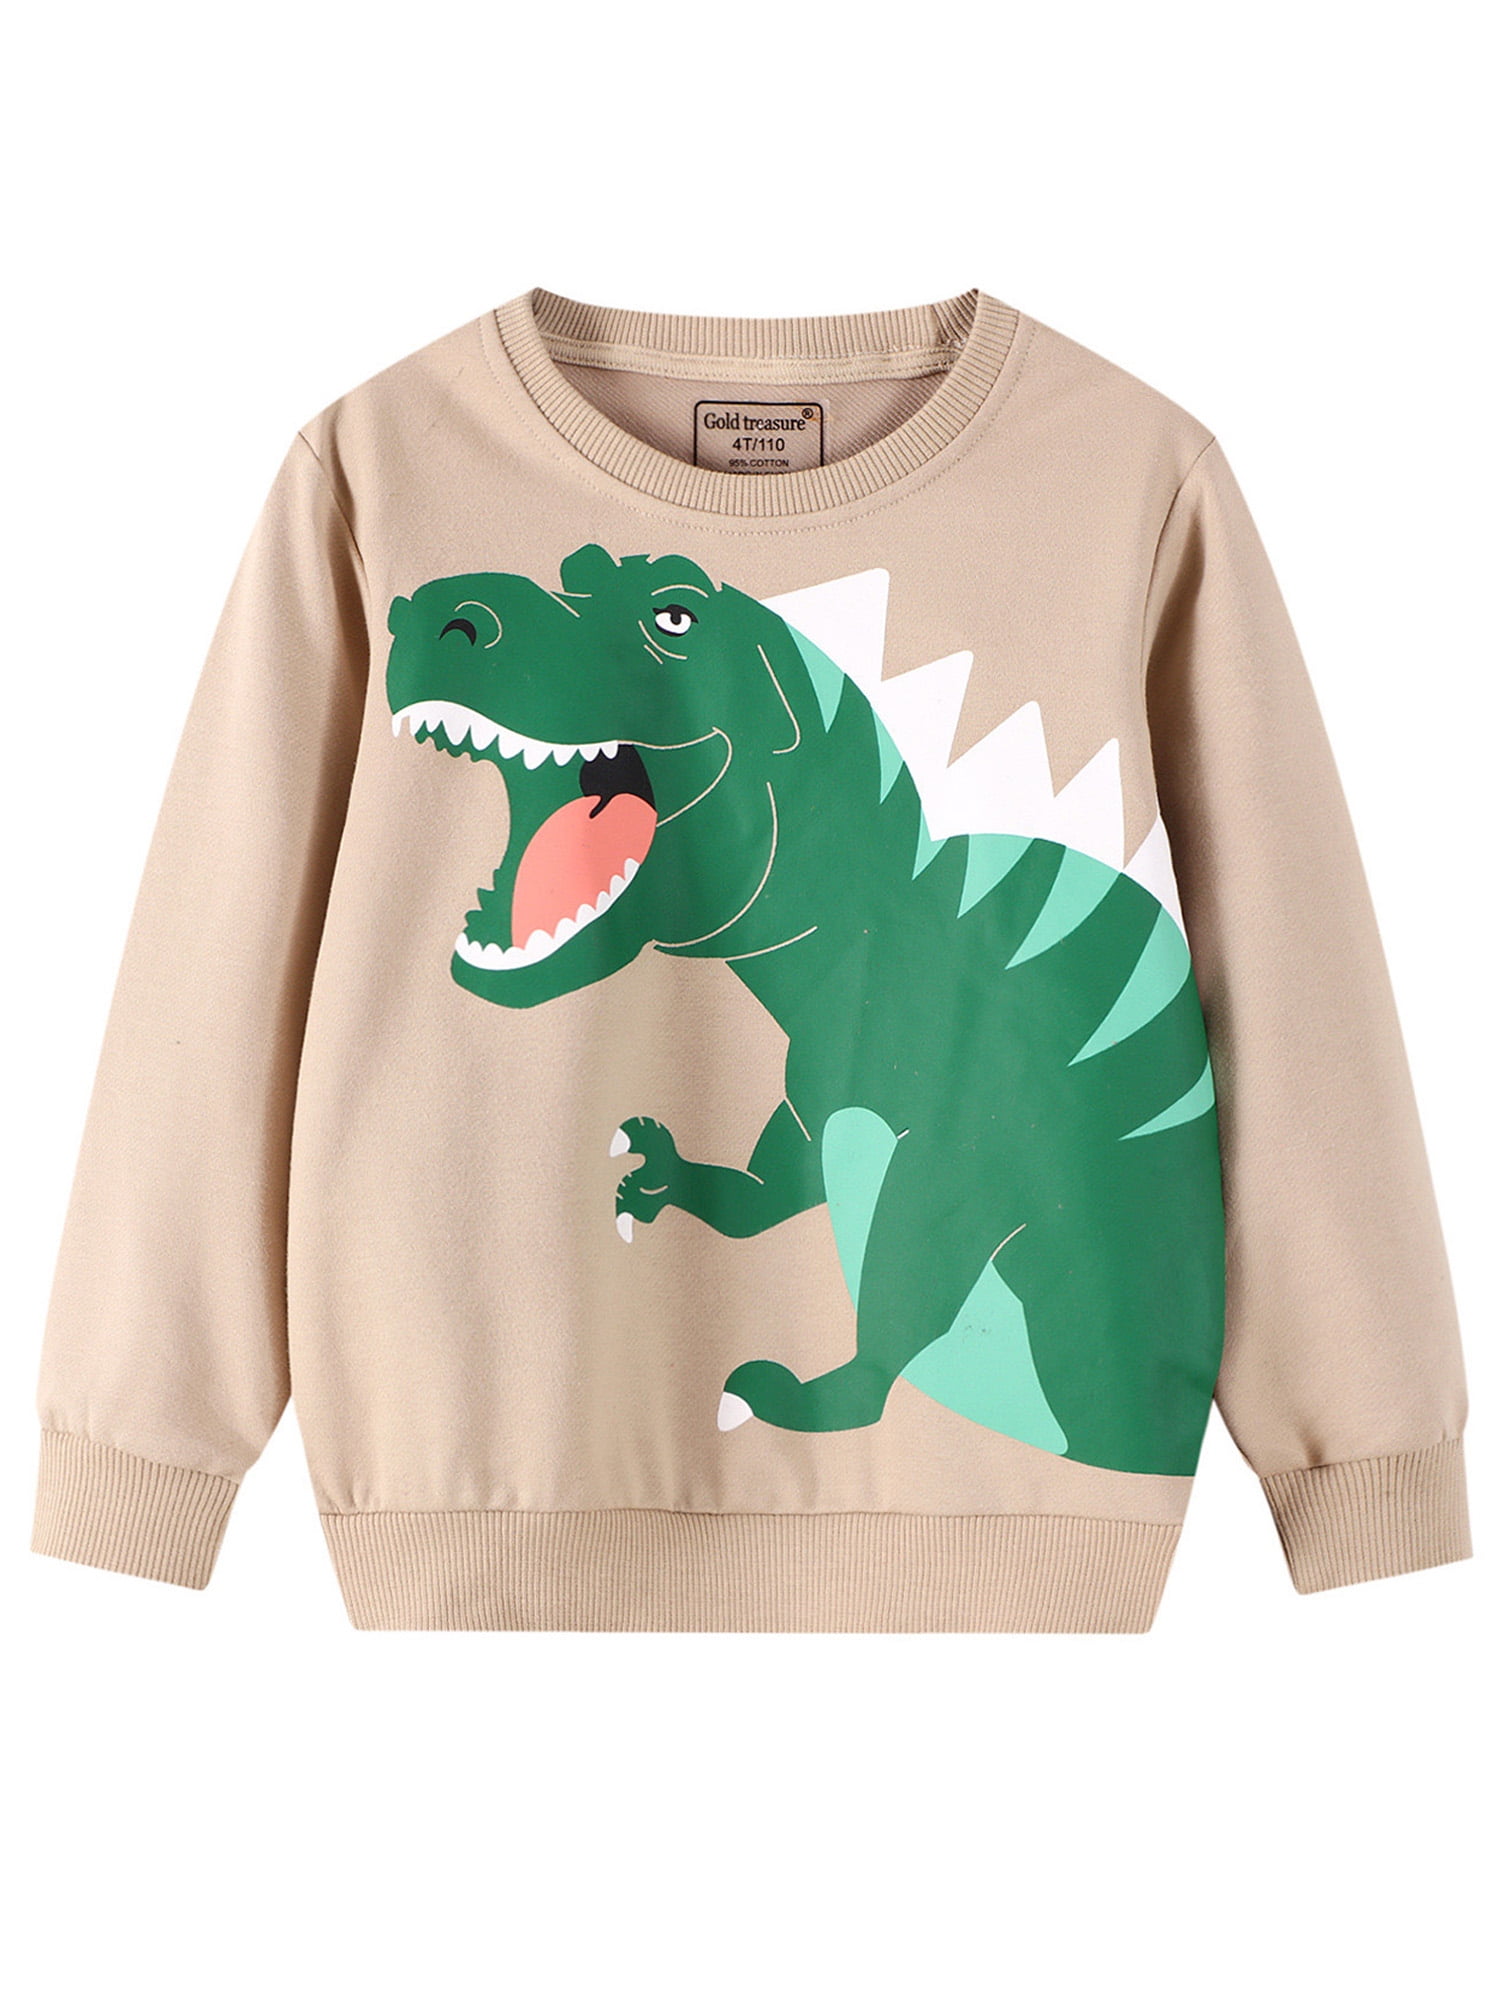 Little Hand Childrens Cotton Sweater Boys Caricature Dinosaur Long-Sleeved Crew Neck Pullover 92 98 104 110 116 122 